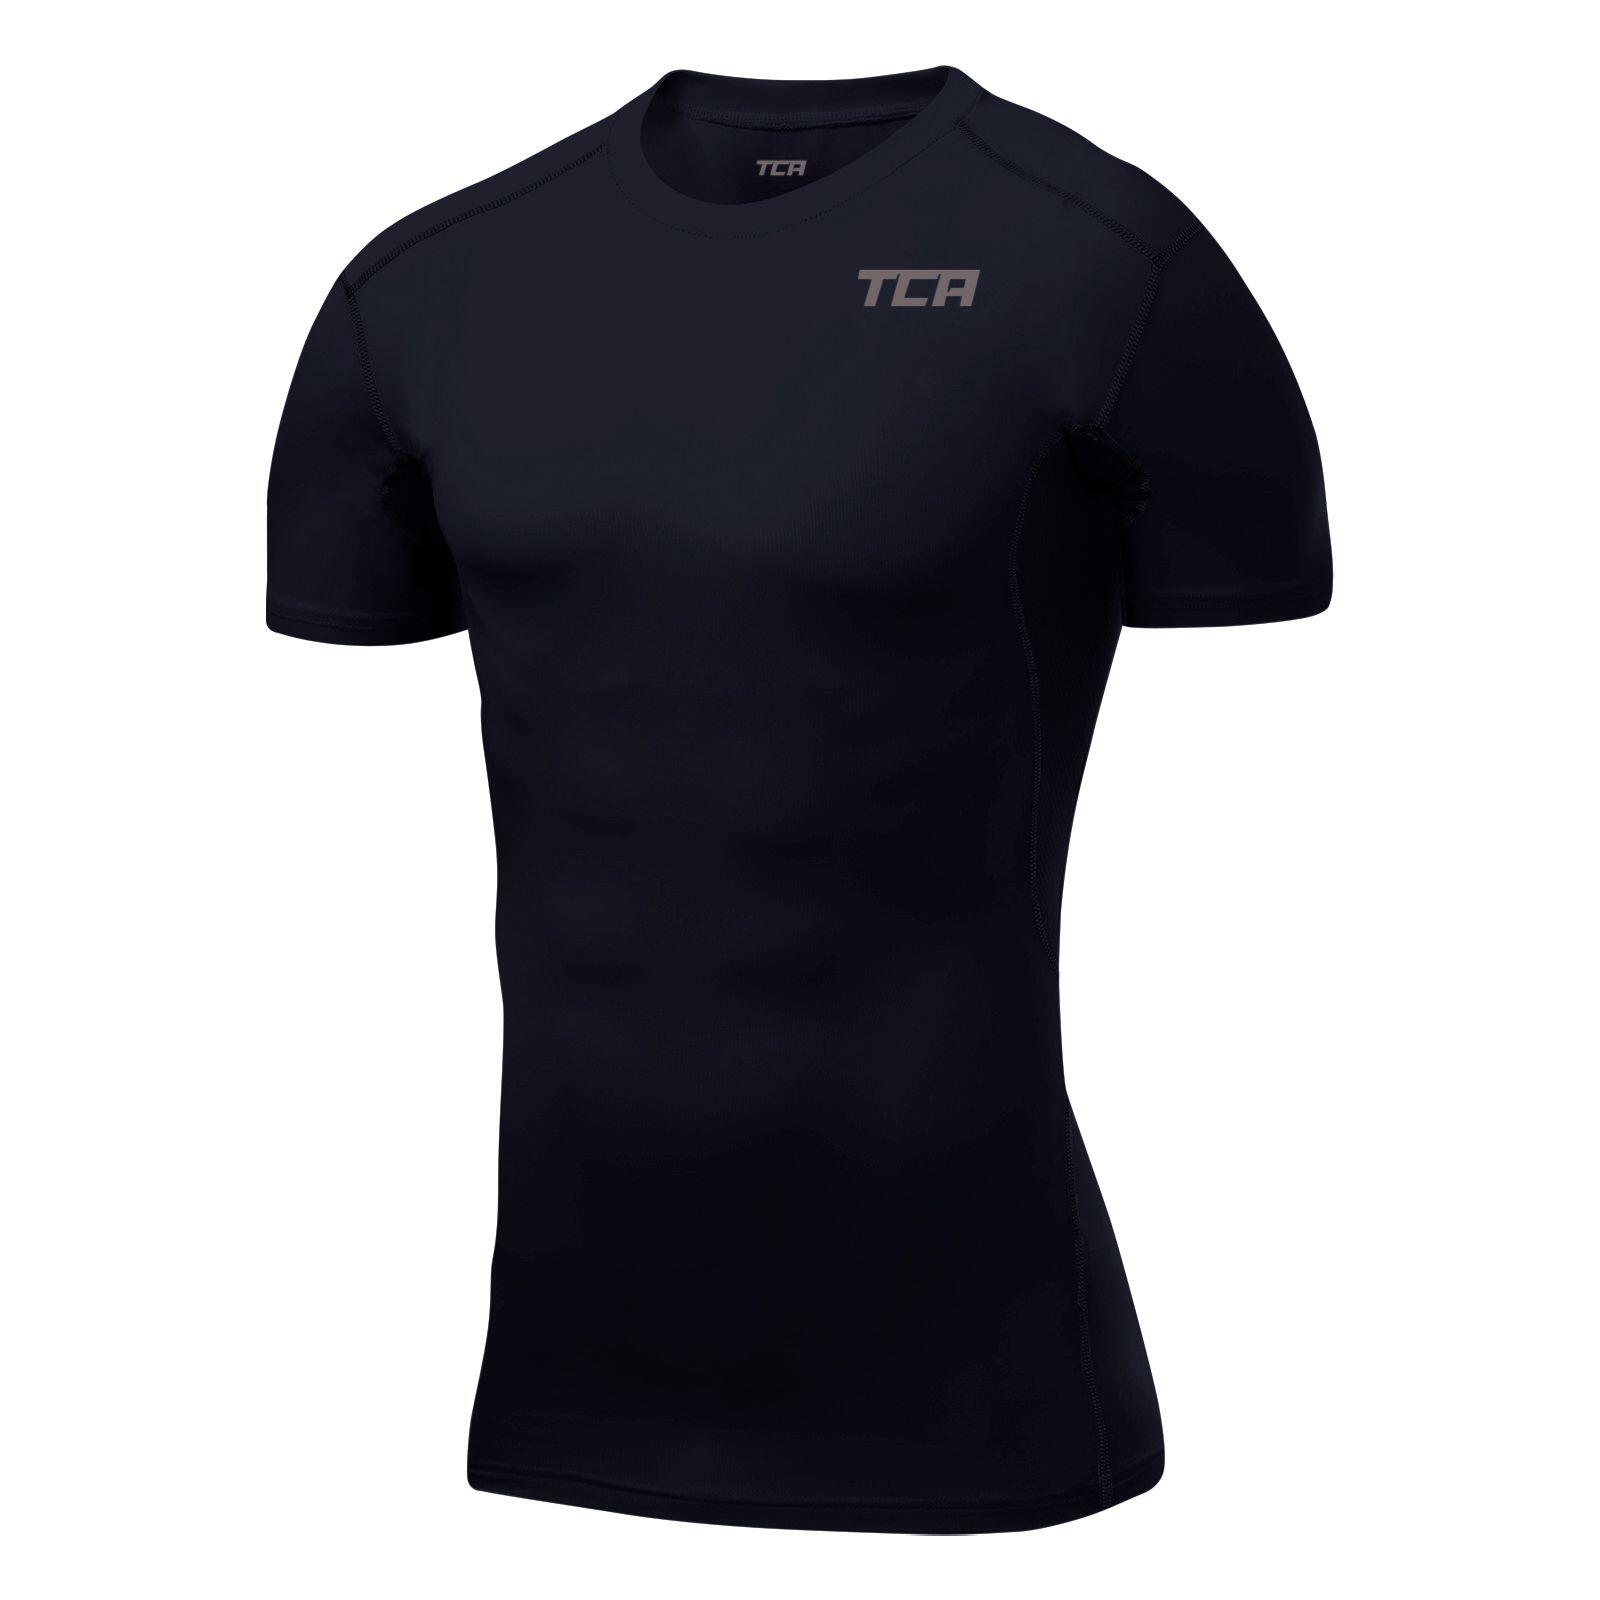 TCA Men's HyperFusion Breathable Base Layer Compression T-shirt - Navy Blazer